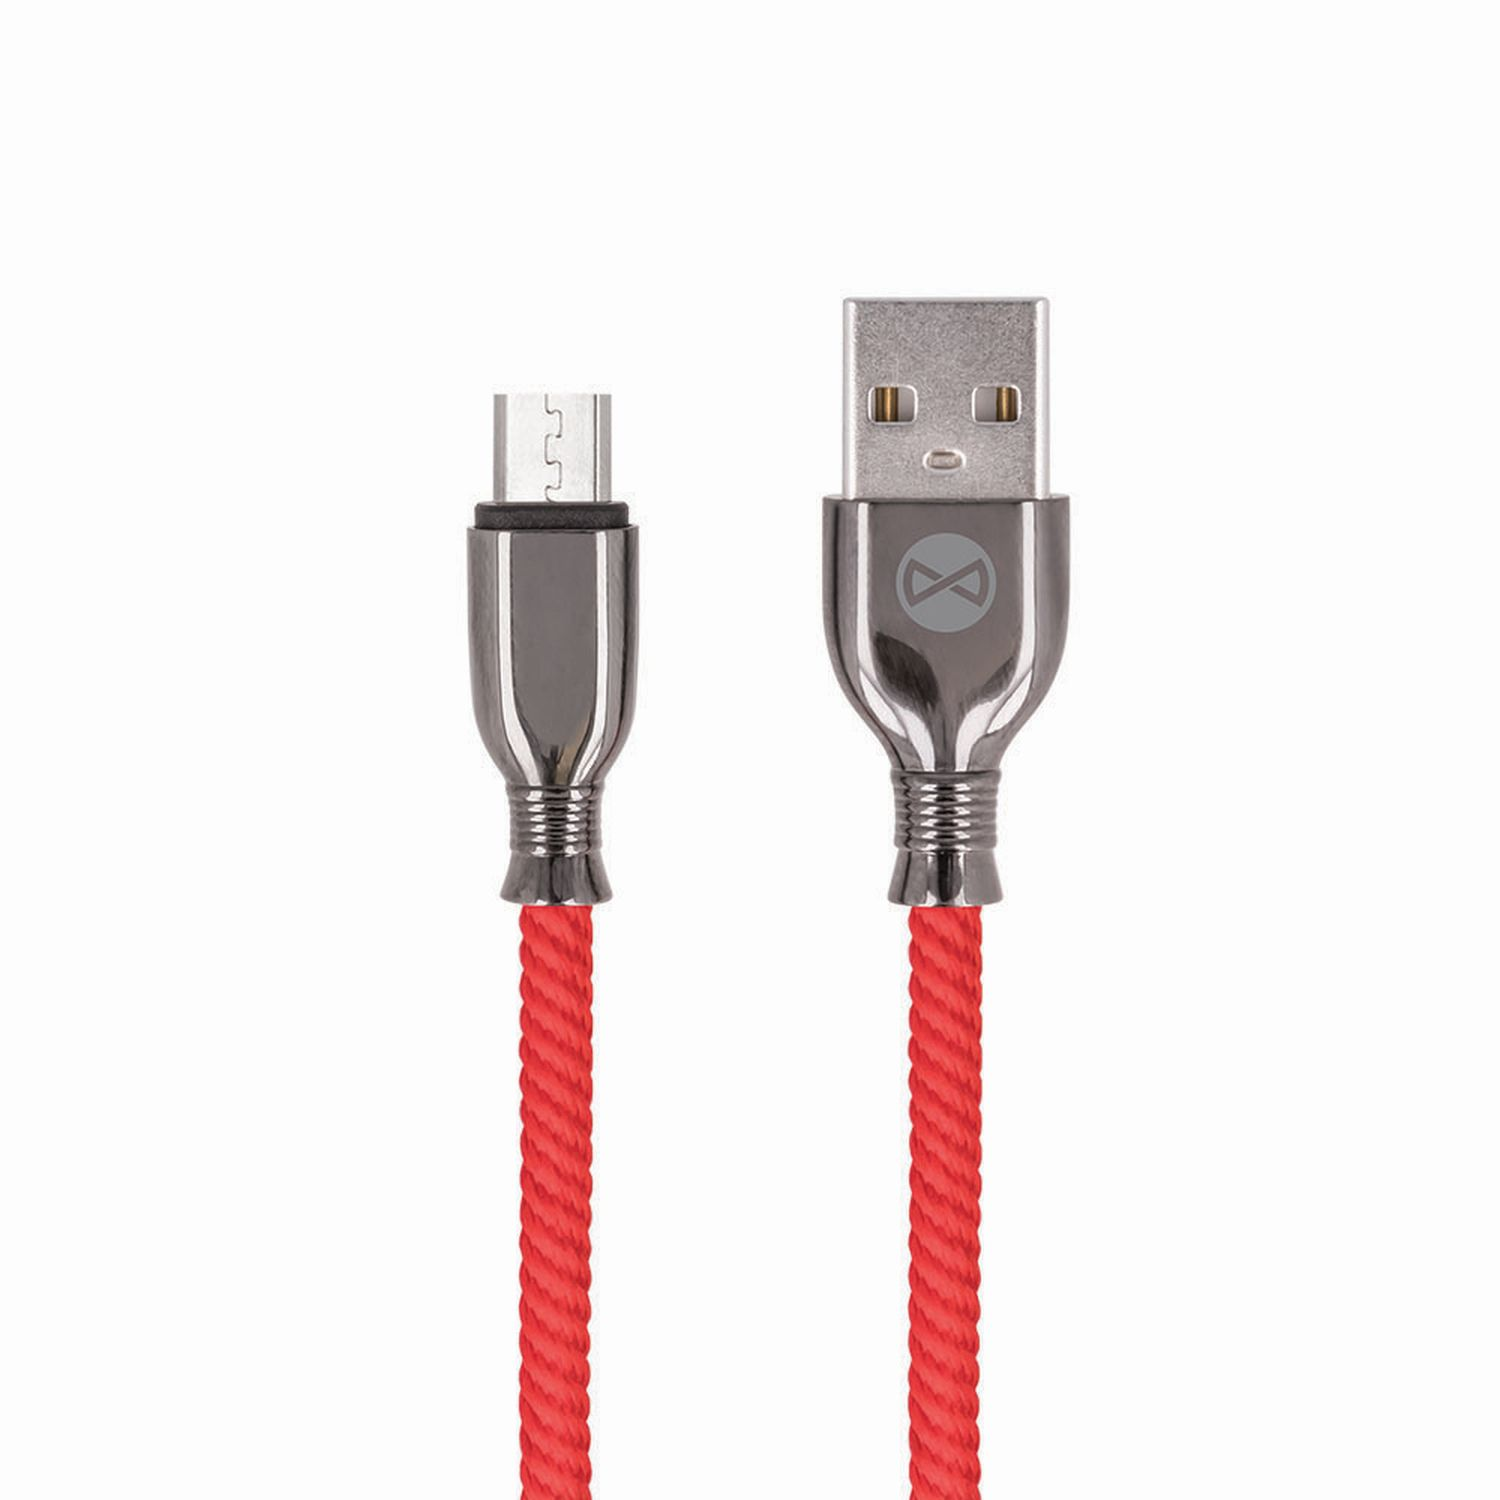 FOREVER Tornado 3A Micro Anti Bruch, Ladekabel, Rot USB